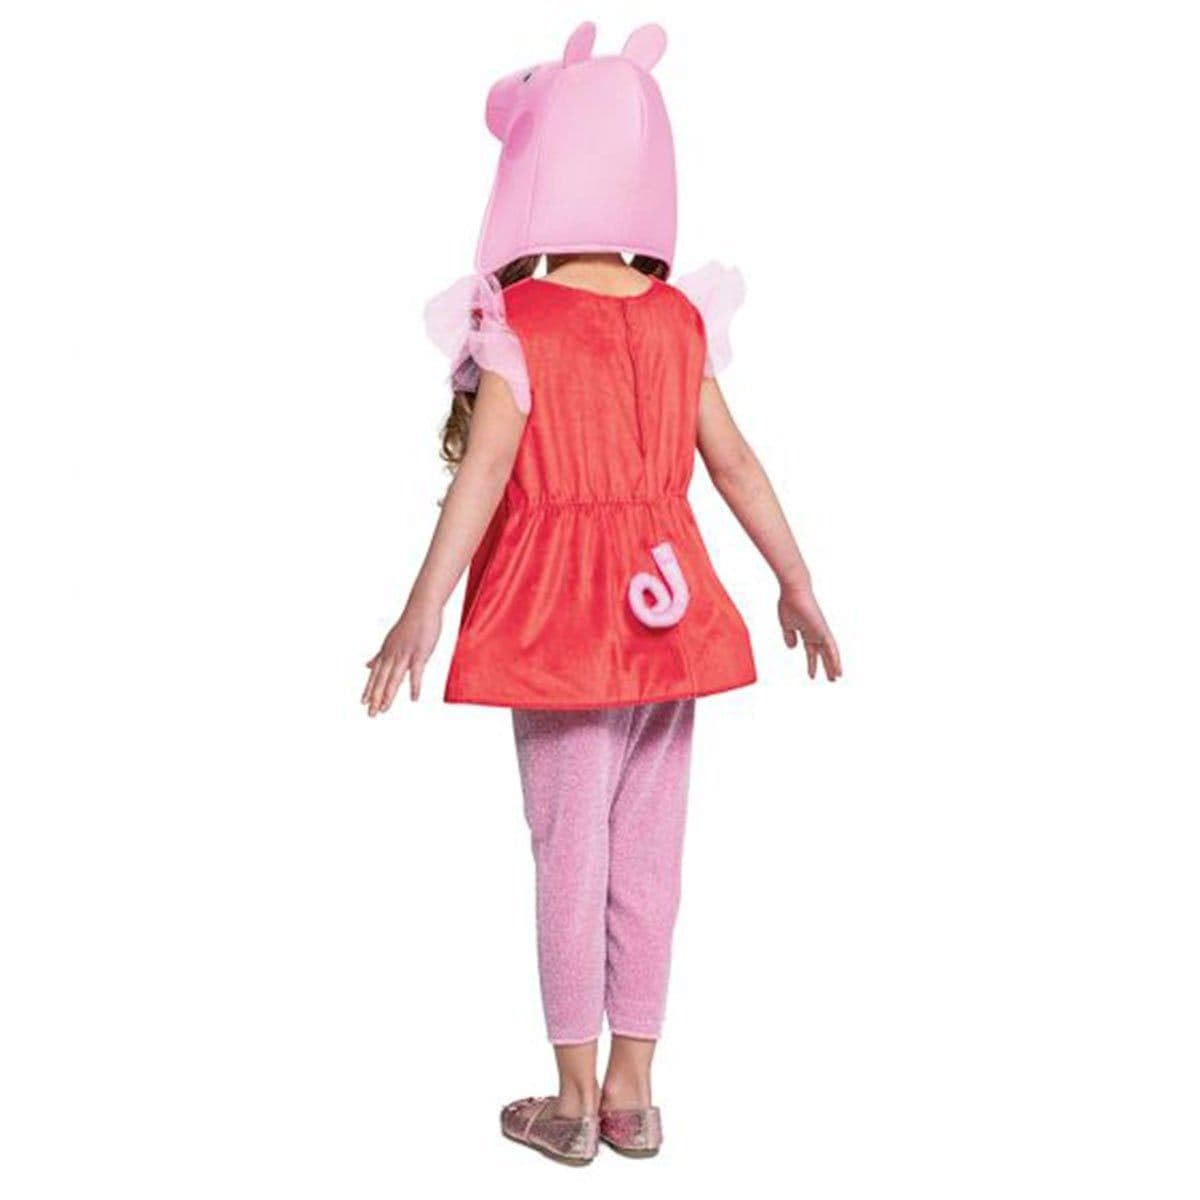 Peppa Pig Costume for Toddler, Peppa Pig